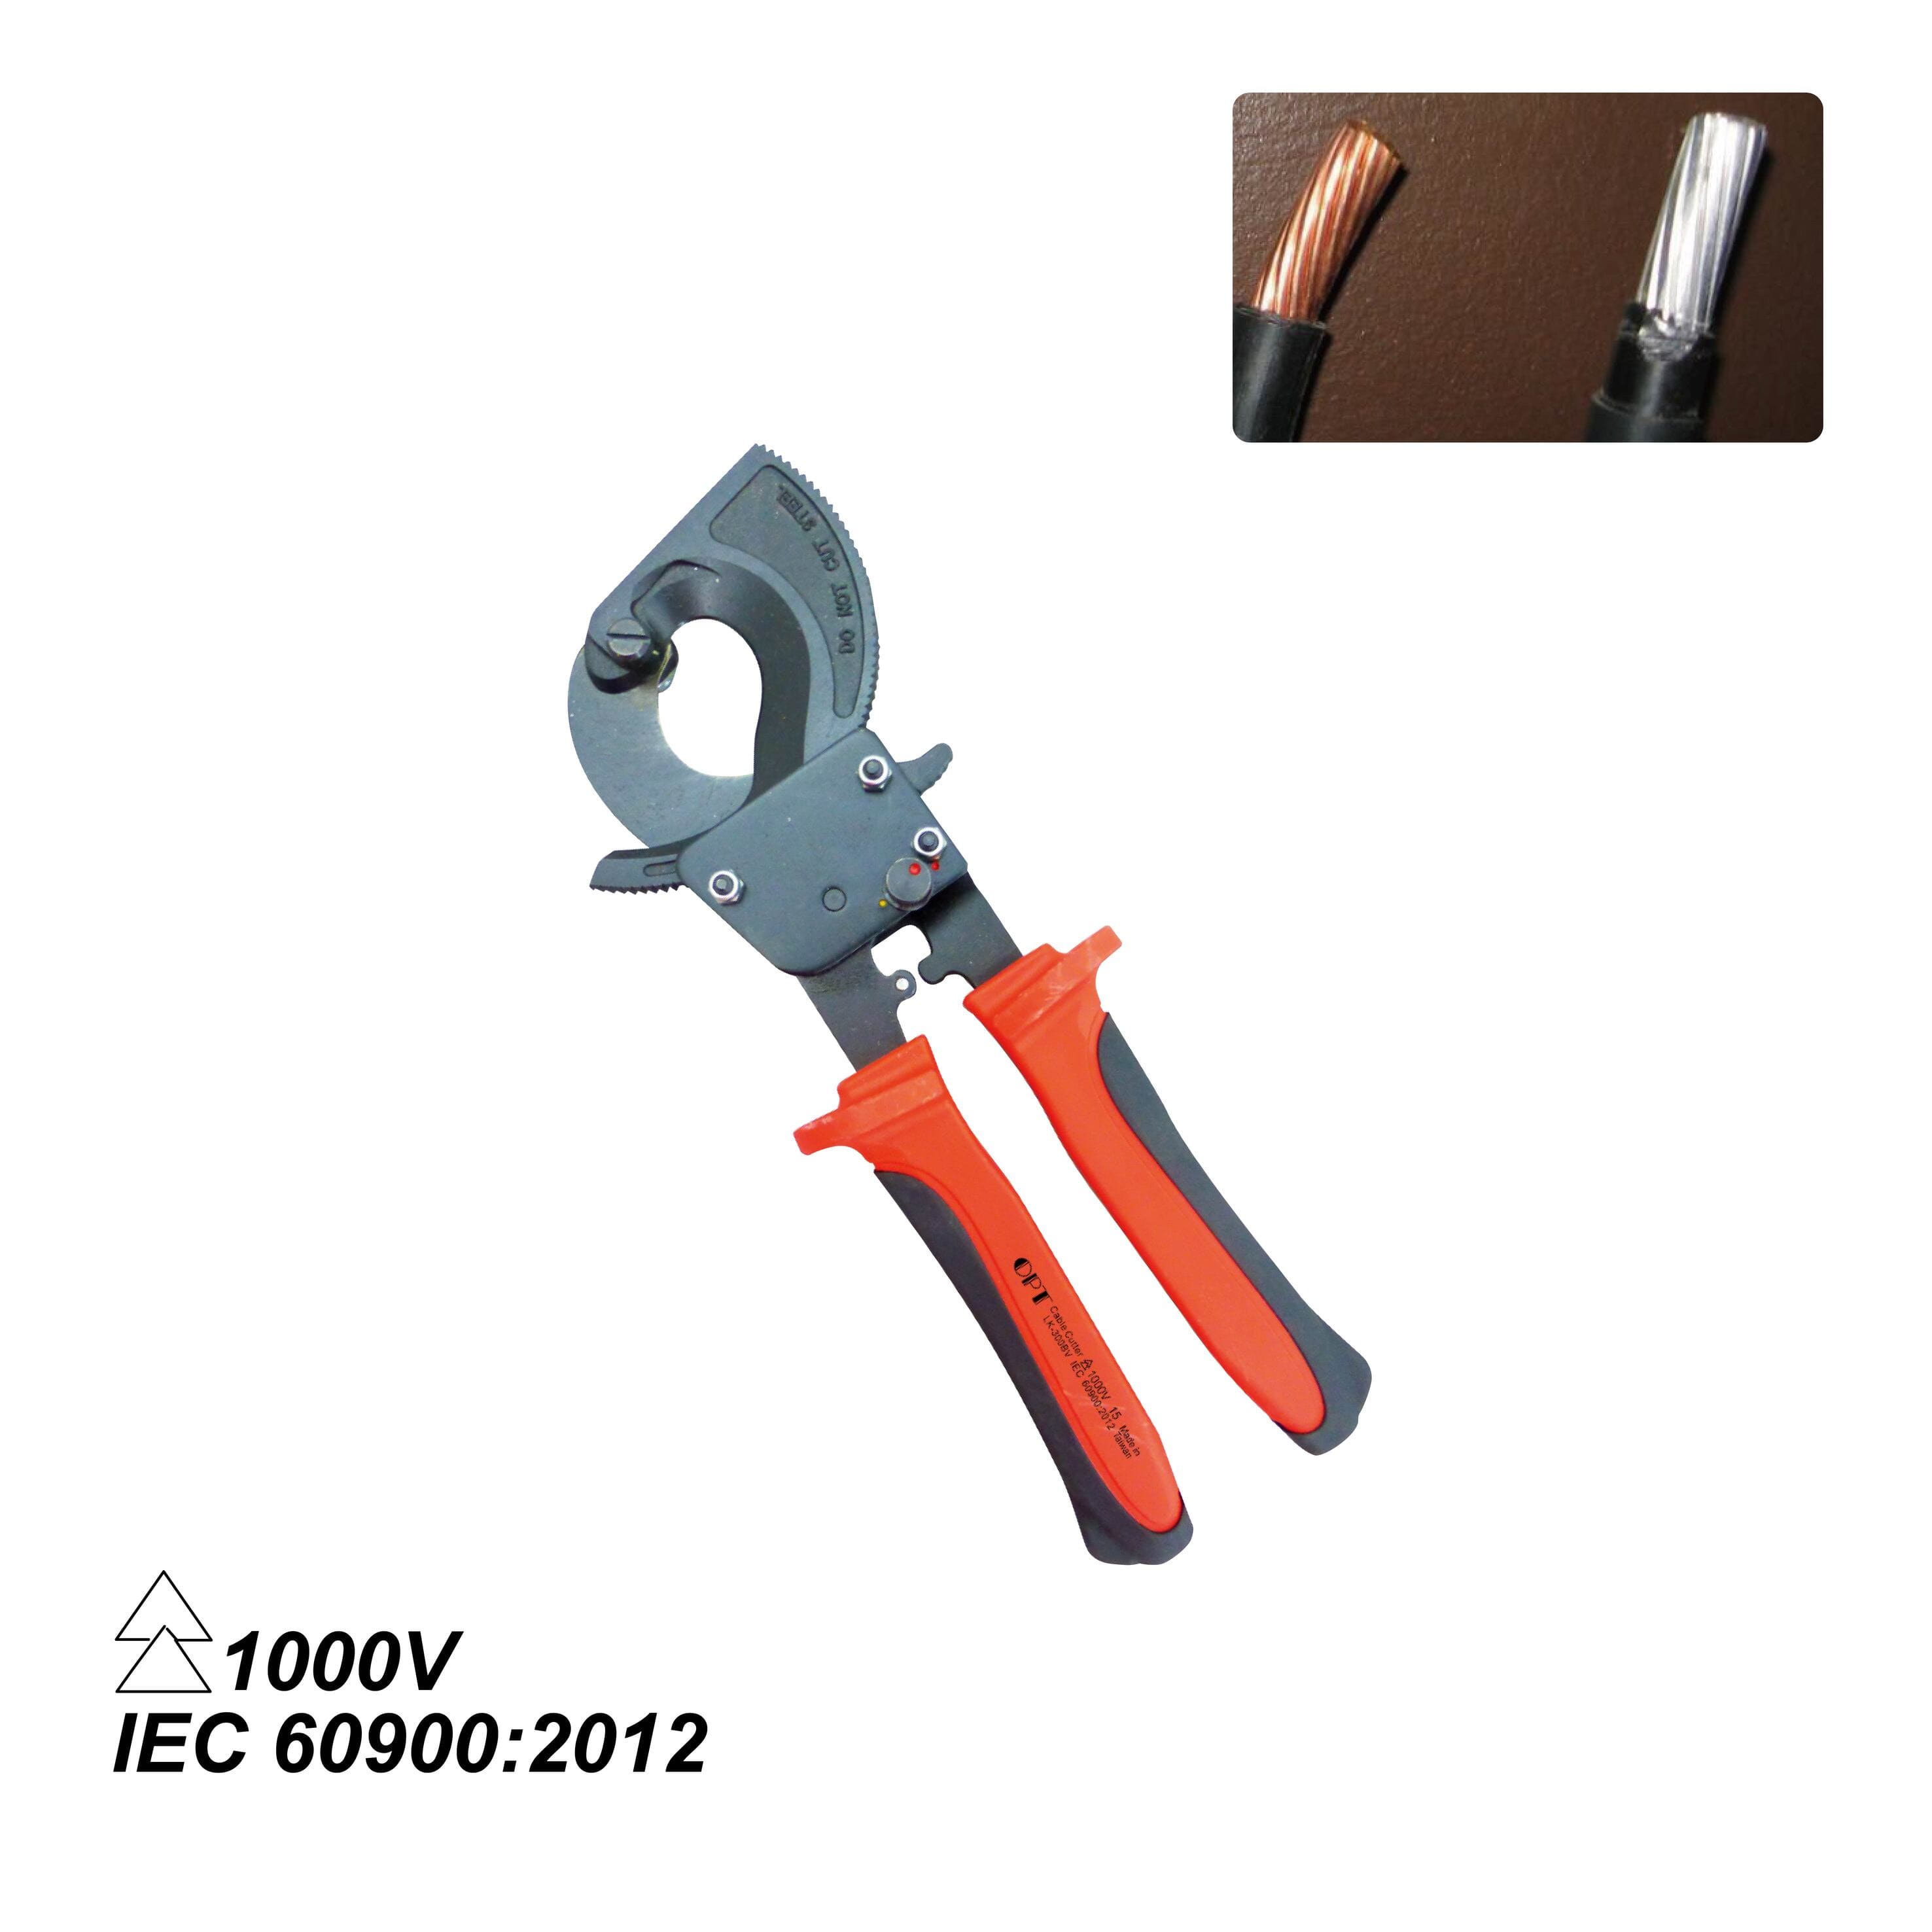 LK-300BV HAND CABLE CUTTERS-LK-300BV 